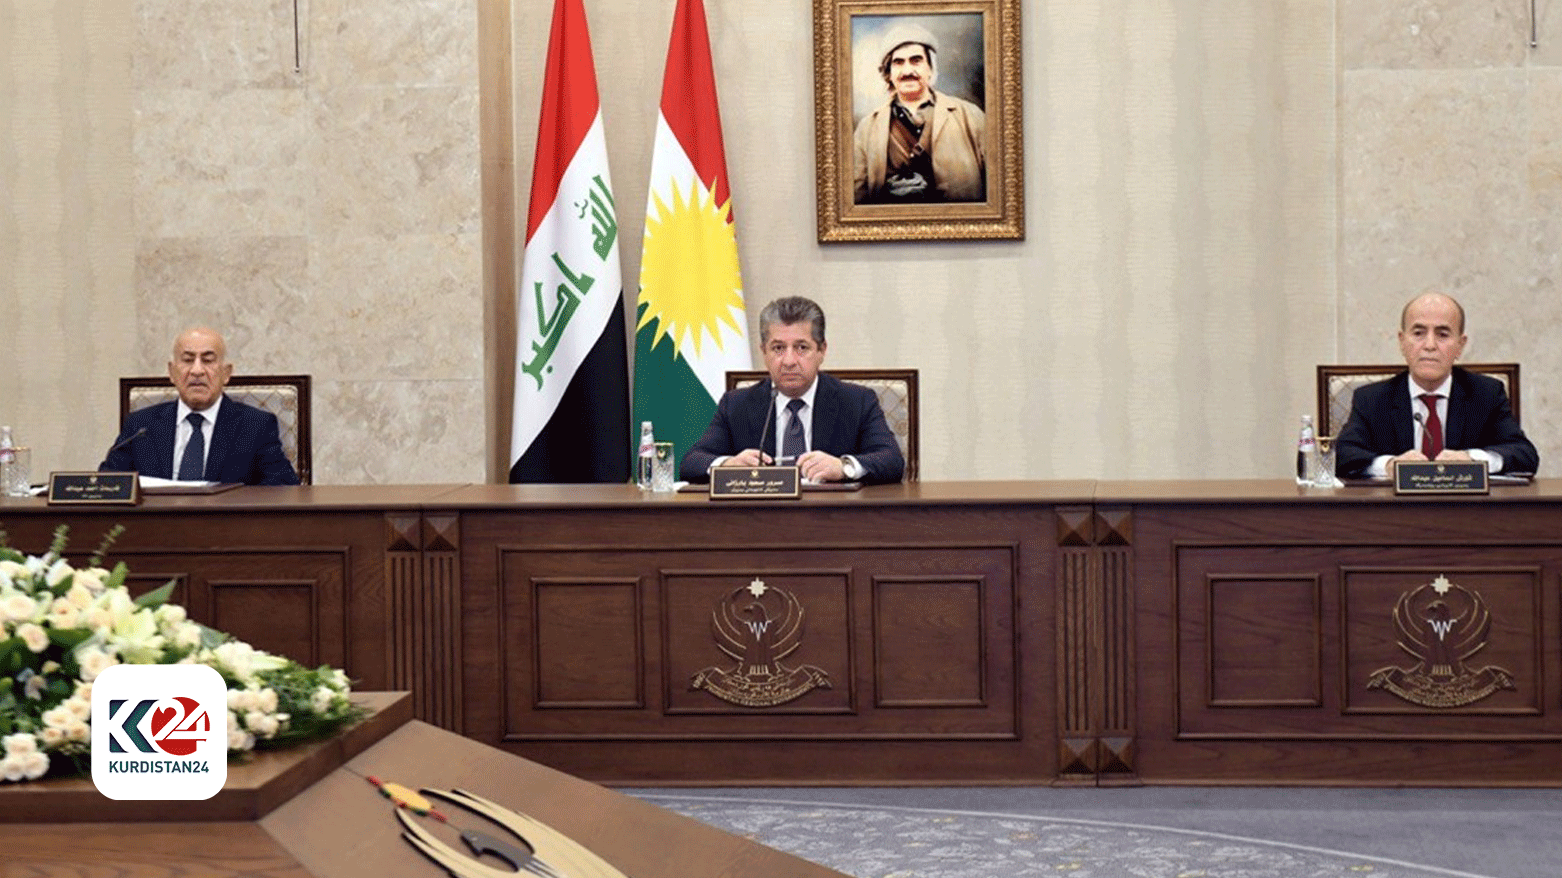 PUK welcomes new date for Kurdistan Parliament elections